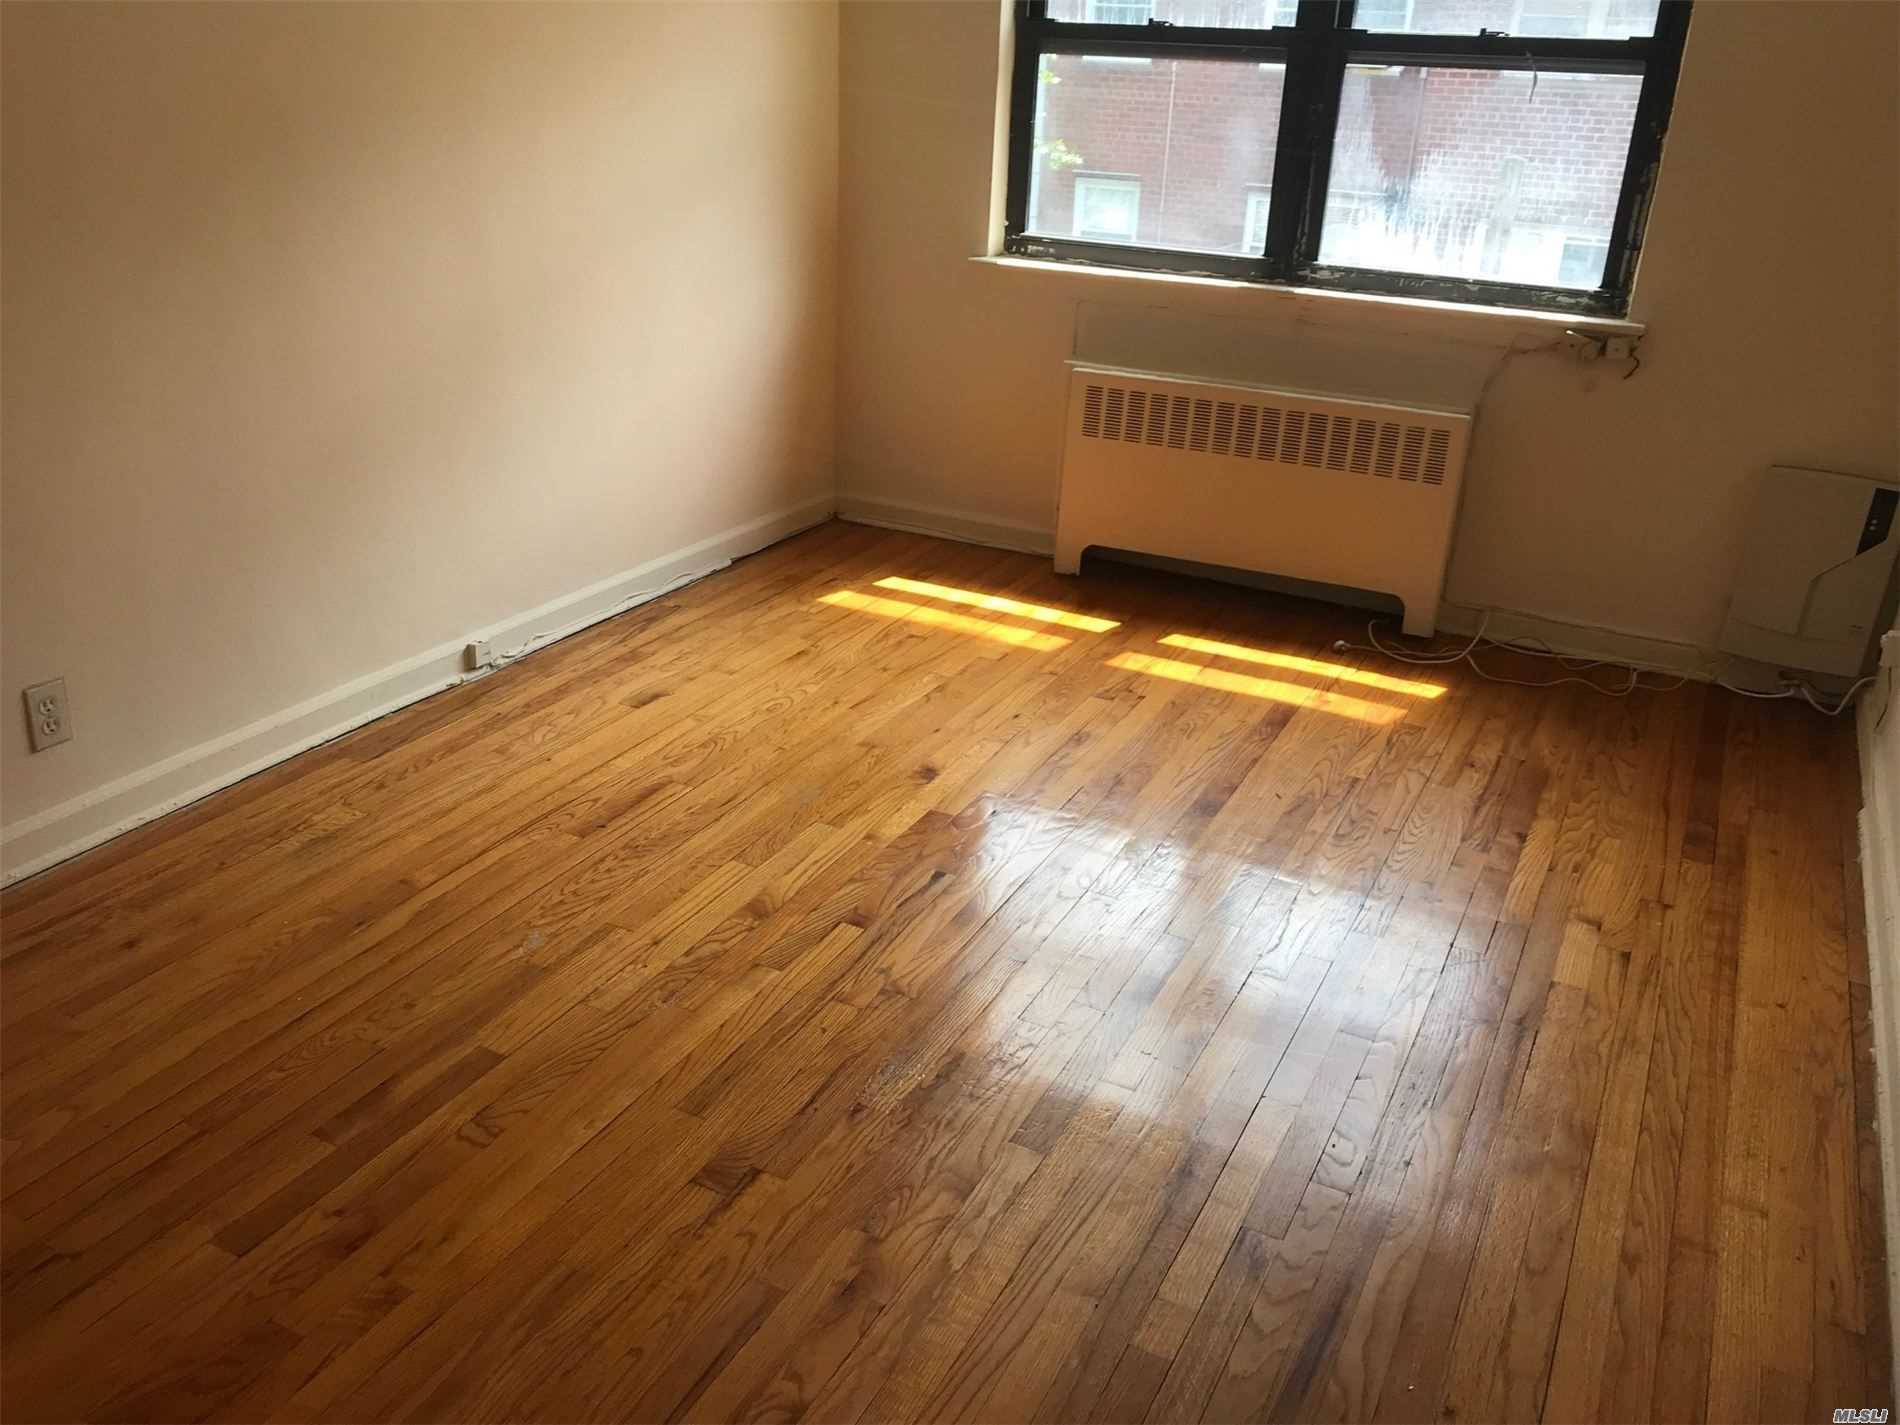 Lovely Spacious 3 Bedroom Apartment For Rent In Whitestone, Features Living Room, Dining Room, Eat-In-Kitchen w/ Dishwasher, And 1 Full Bathroom. Hardwood Floors Throughout. Coin Operated Washer And Dryer On Premises. Shared Yard. Landlord Pays Heat And Water. Conveniently Located Near Public Transportation, Parks, And Shops.